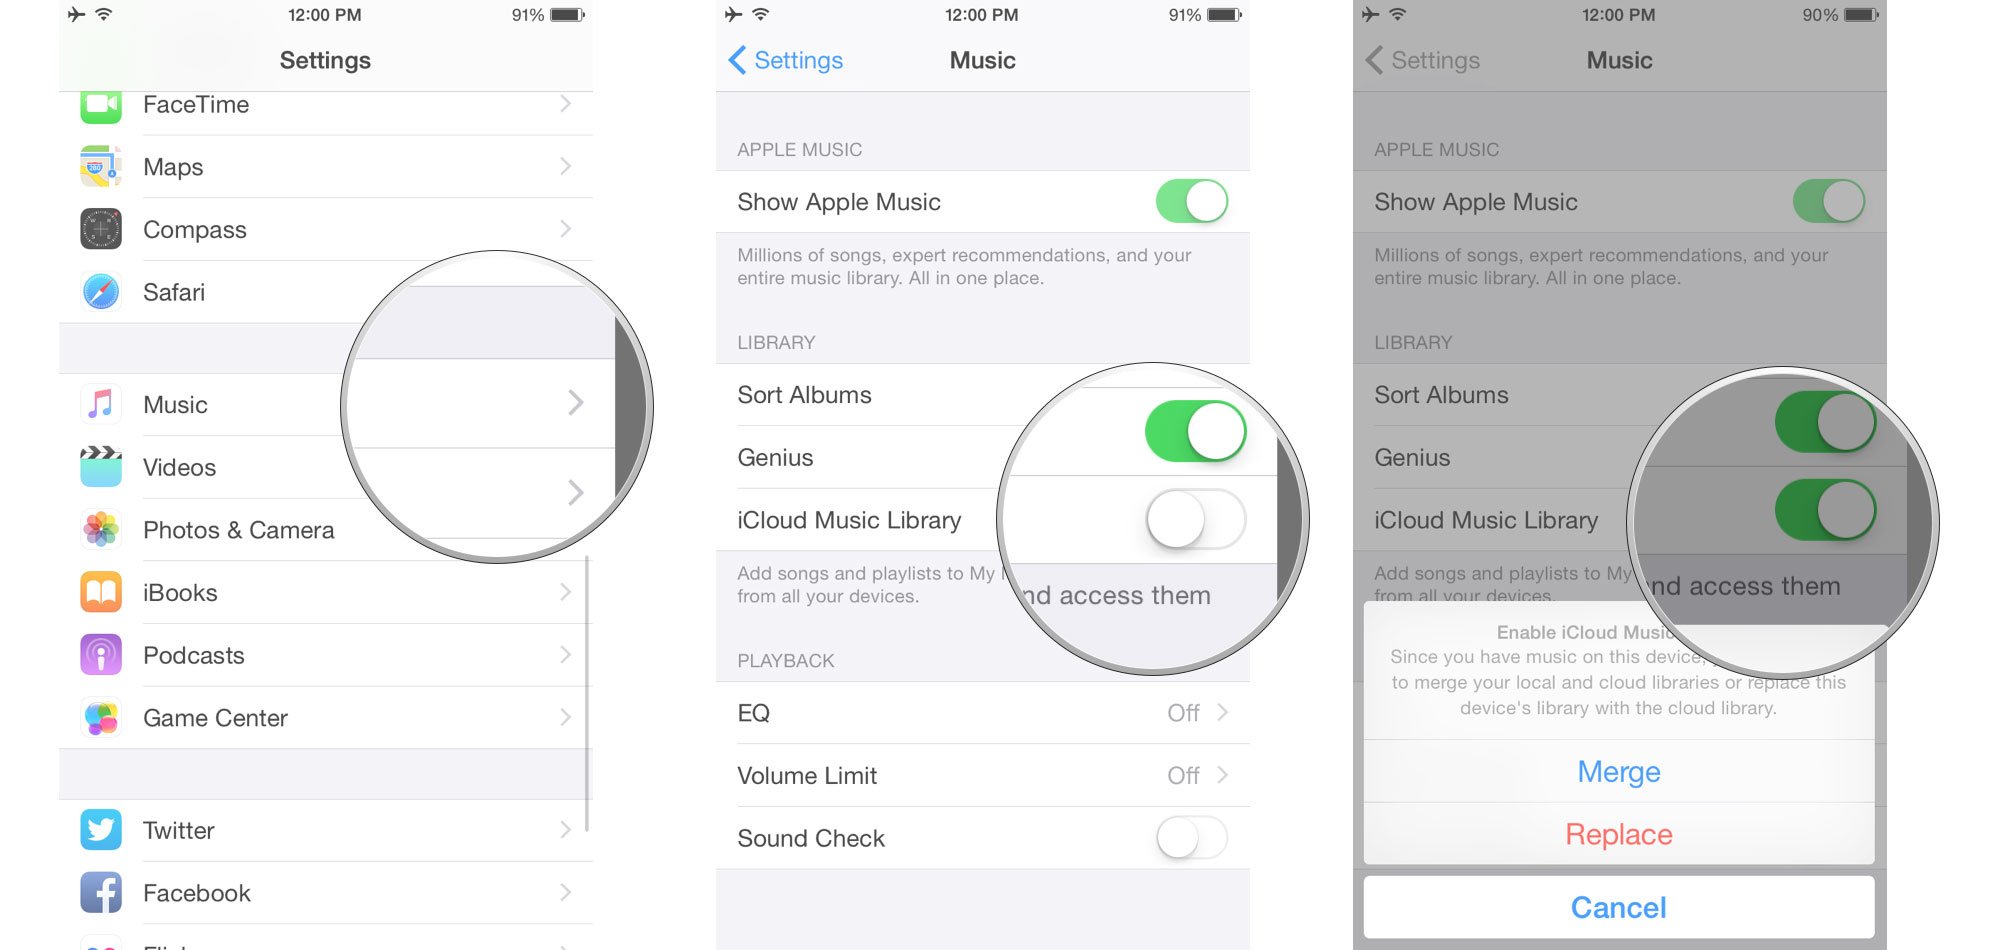 Open Settings, then tap Music, then tap iCloud Music Library